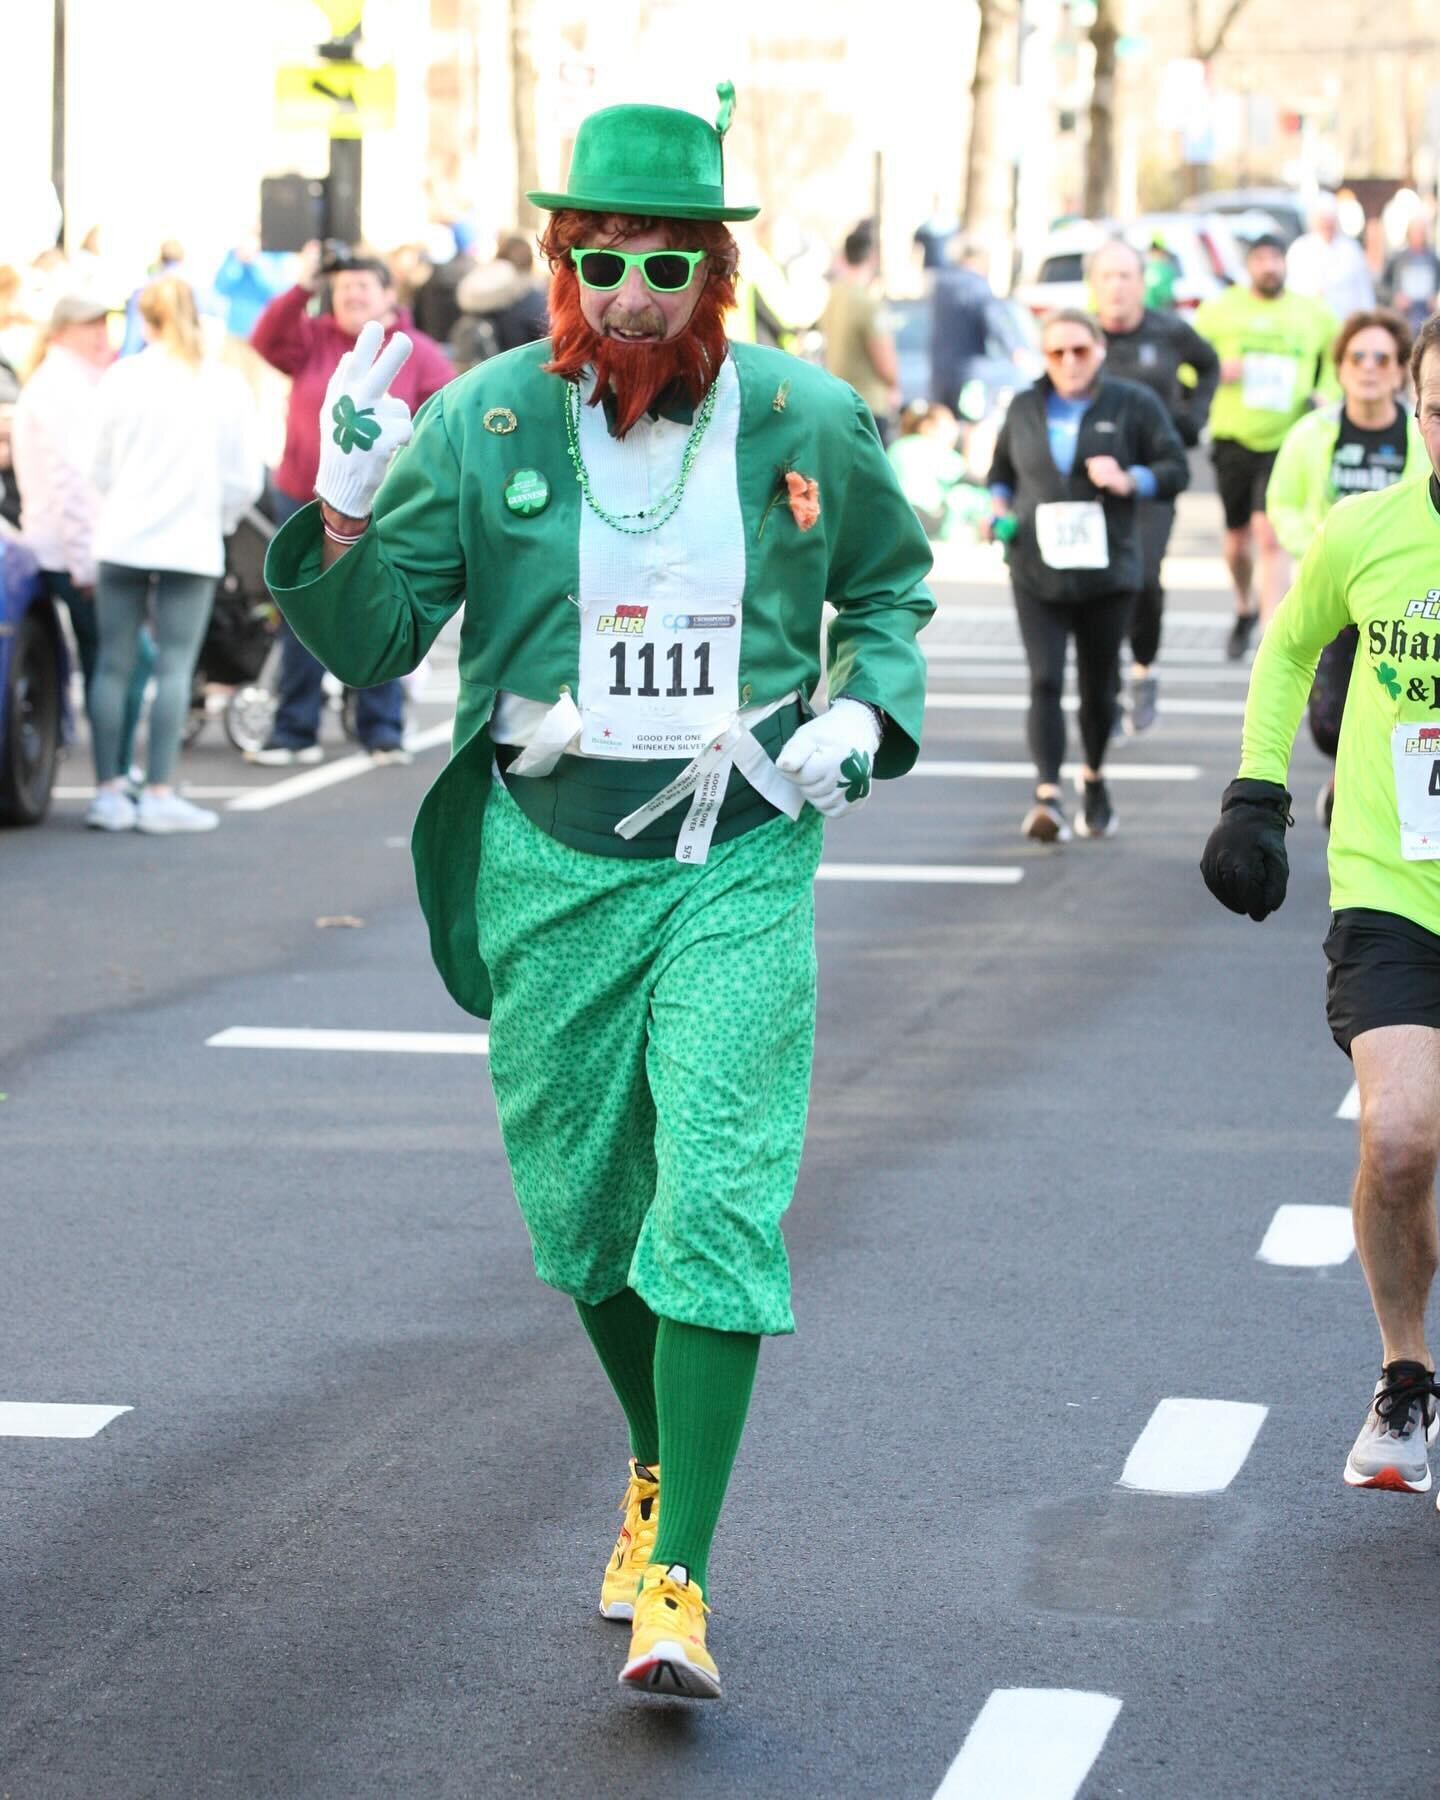 Whatever you dress as, all are welcome at the PLR ShamRock and Roll on March 3rd! 🇮🇪☘️

🚨And because you follow us, use code &ldquo;IG24&rdquo; for $3 off registration TODAY ONLY!🚨☘️ #shamrock #shamrock5k #stpatricksday #happystpatricksday